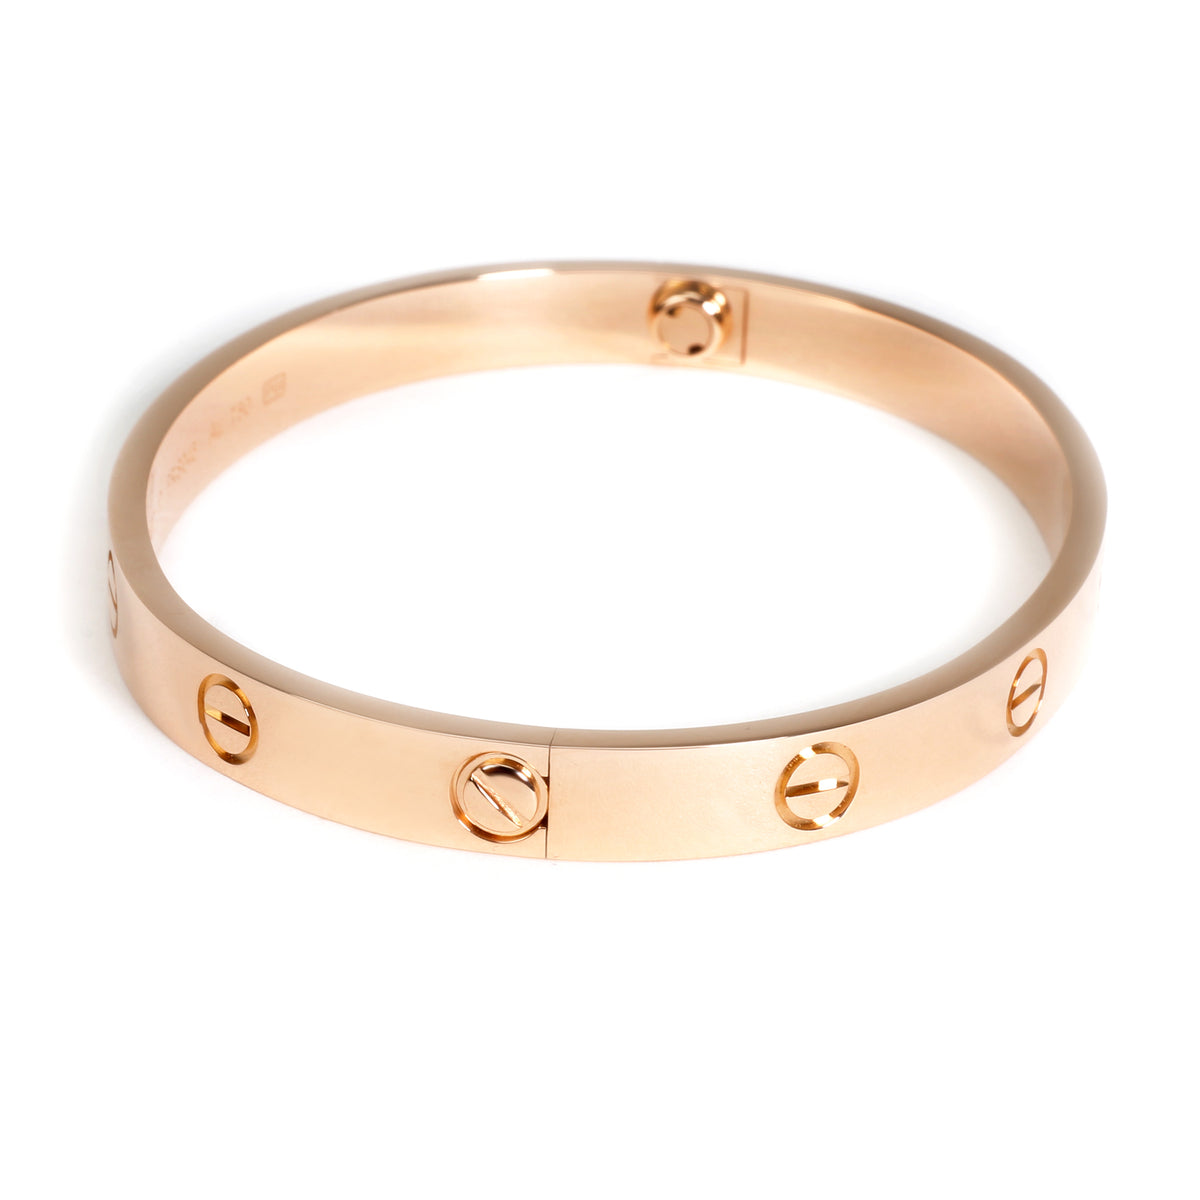 Cartier Love Bangle in 18K Rose Gold Size 17